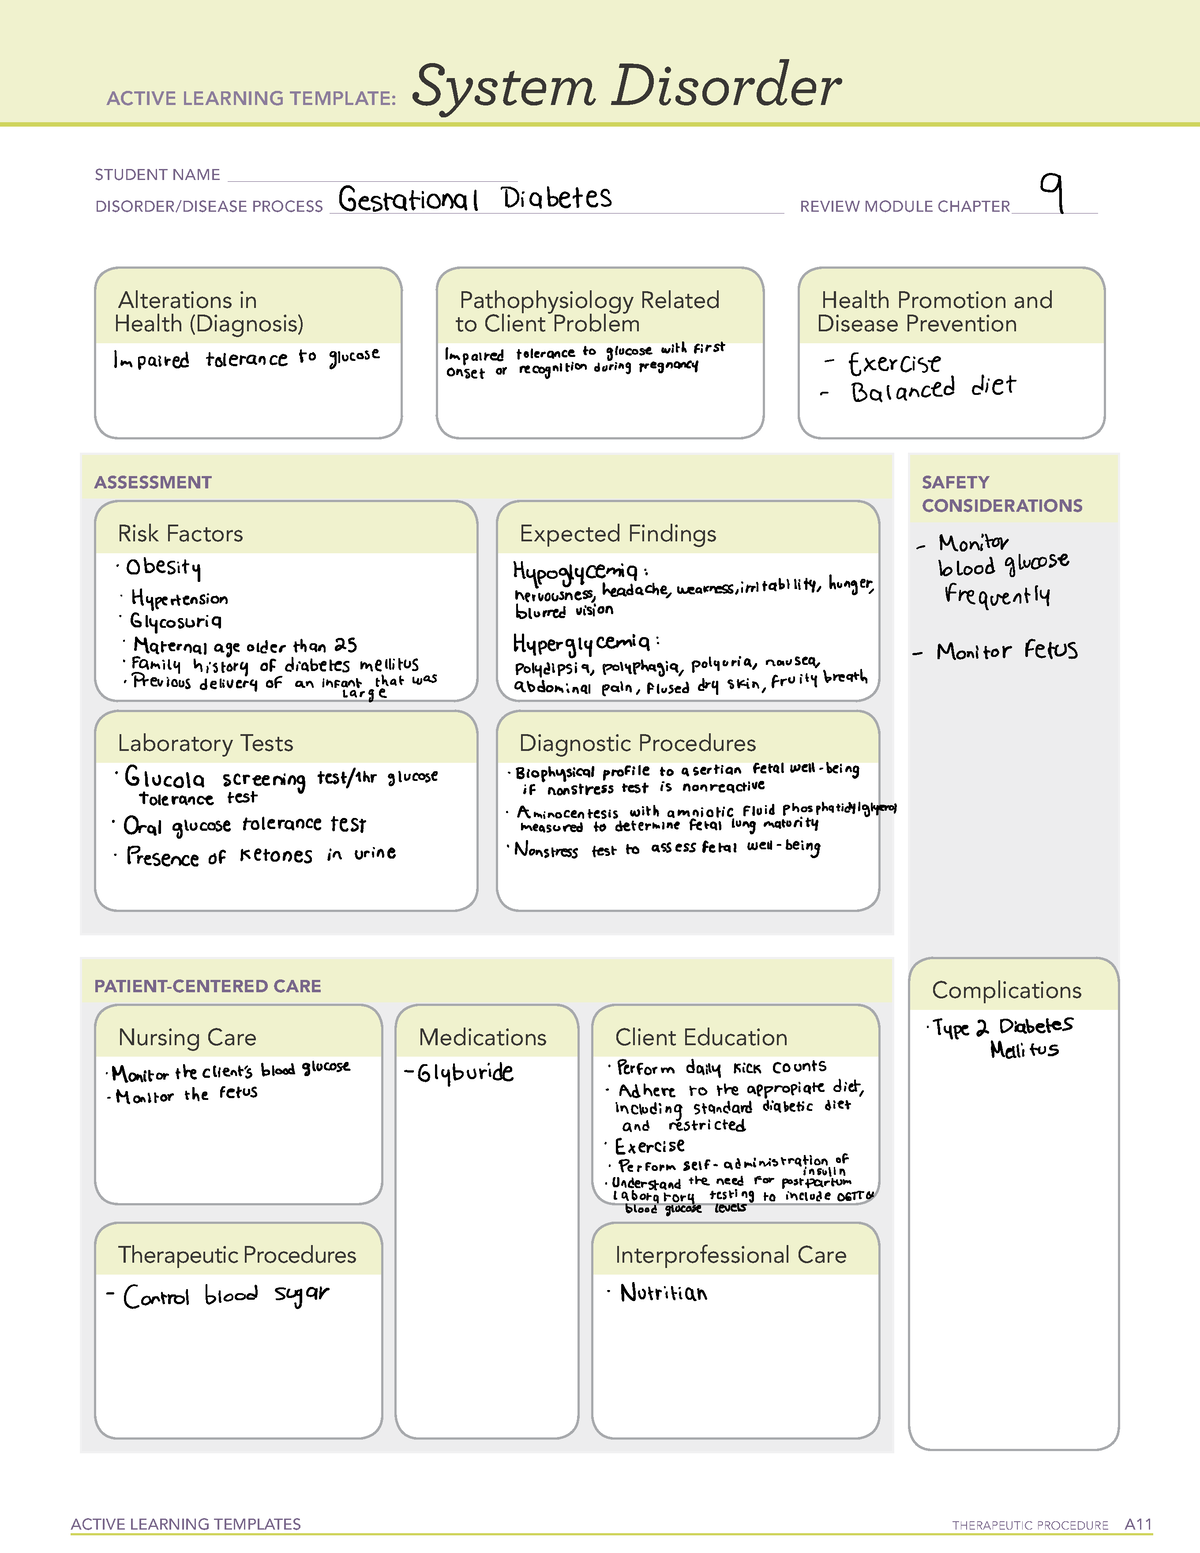 ati-template-gestational-diabetes-active-learning-templates